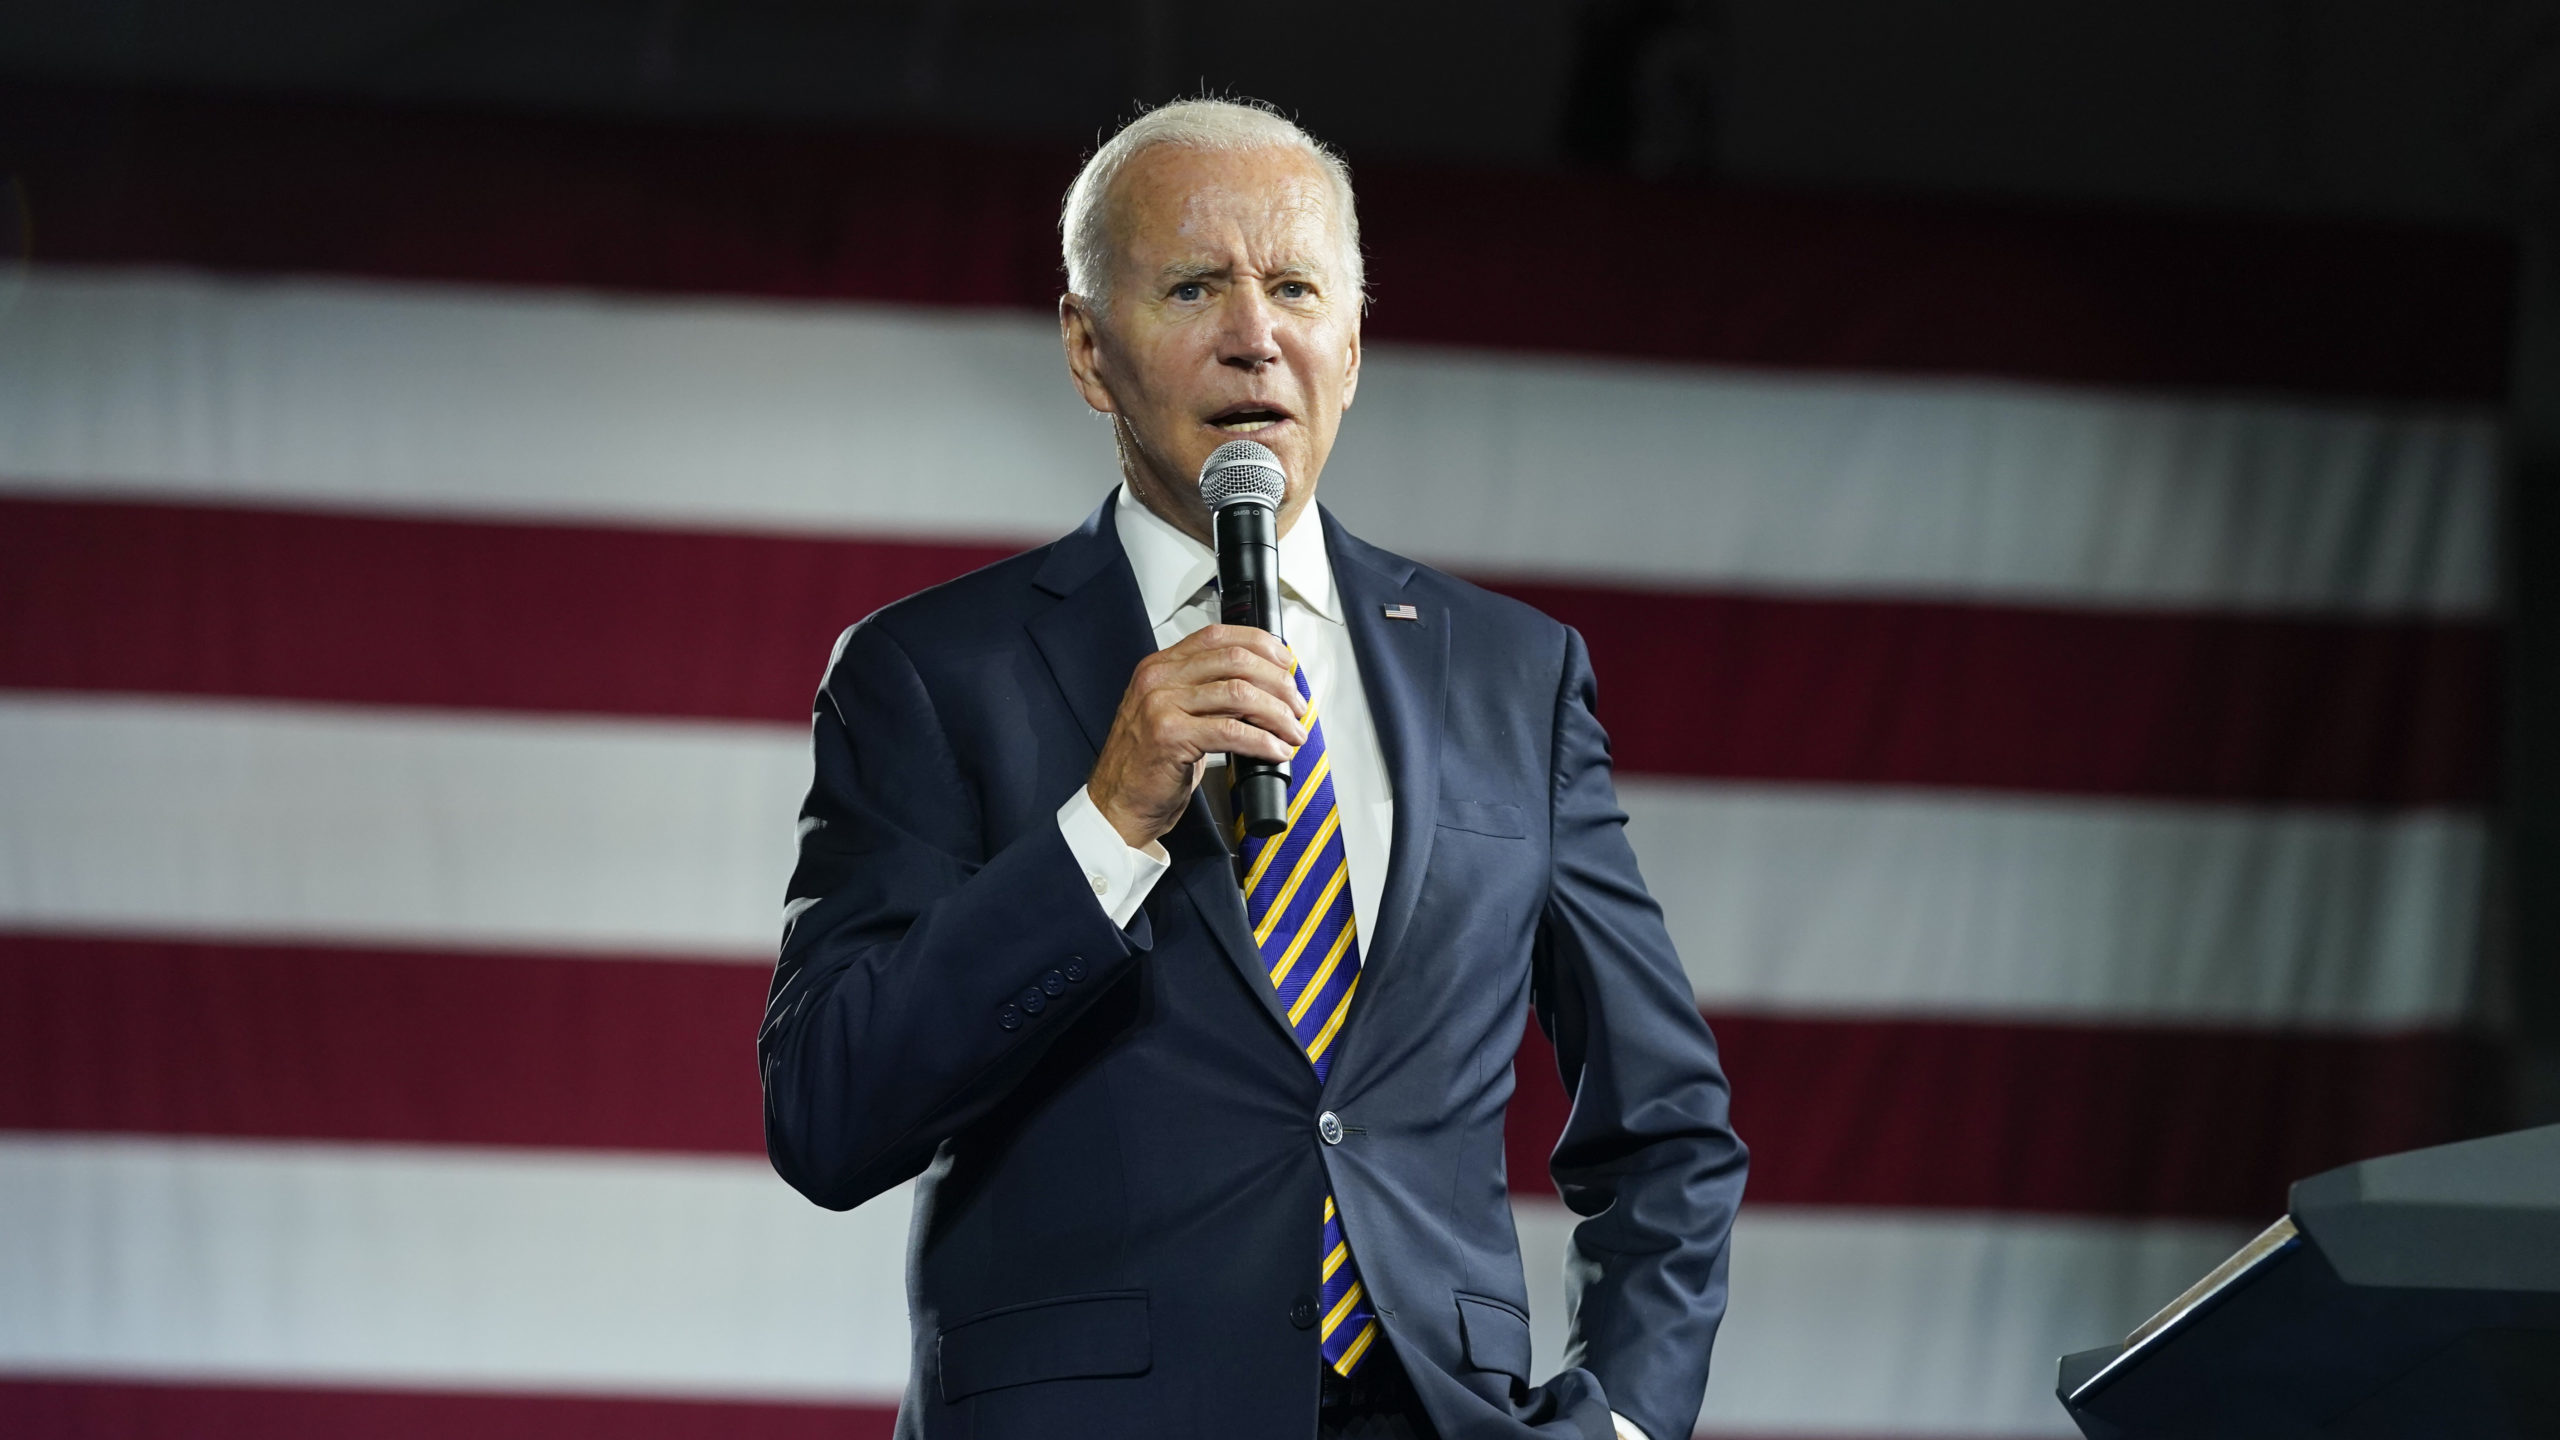 On Wednesday, President Biden announced forgiveness of some student loan debt.
AP Photo/Evan Vucci,...